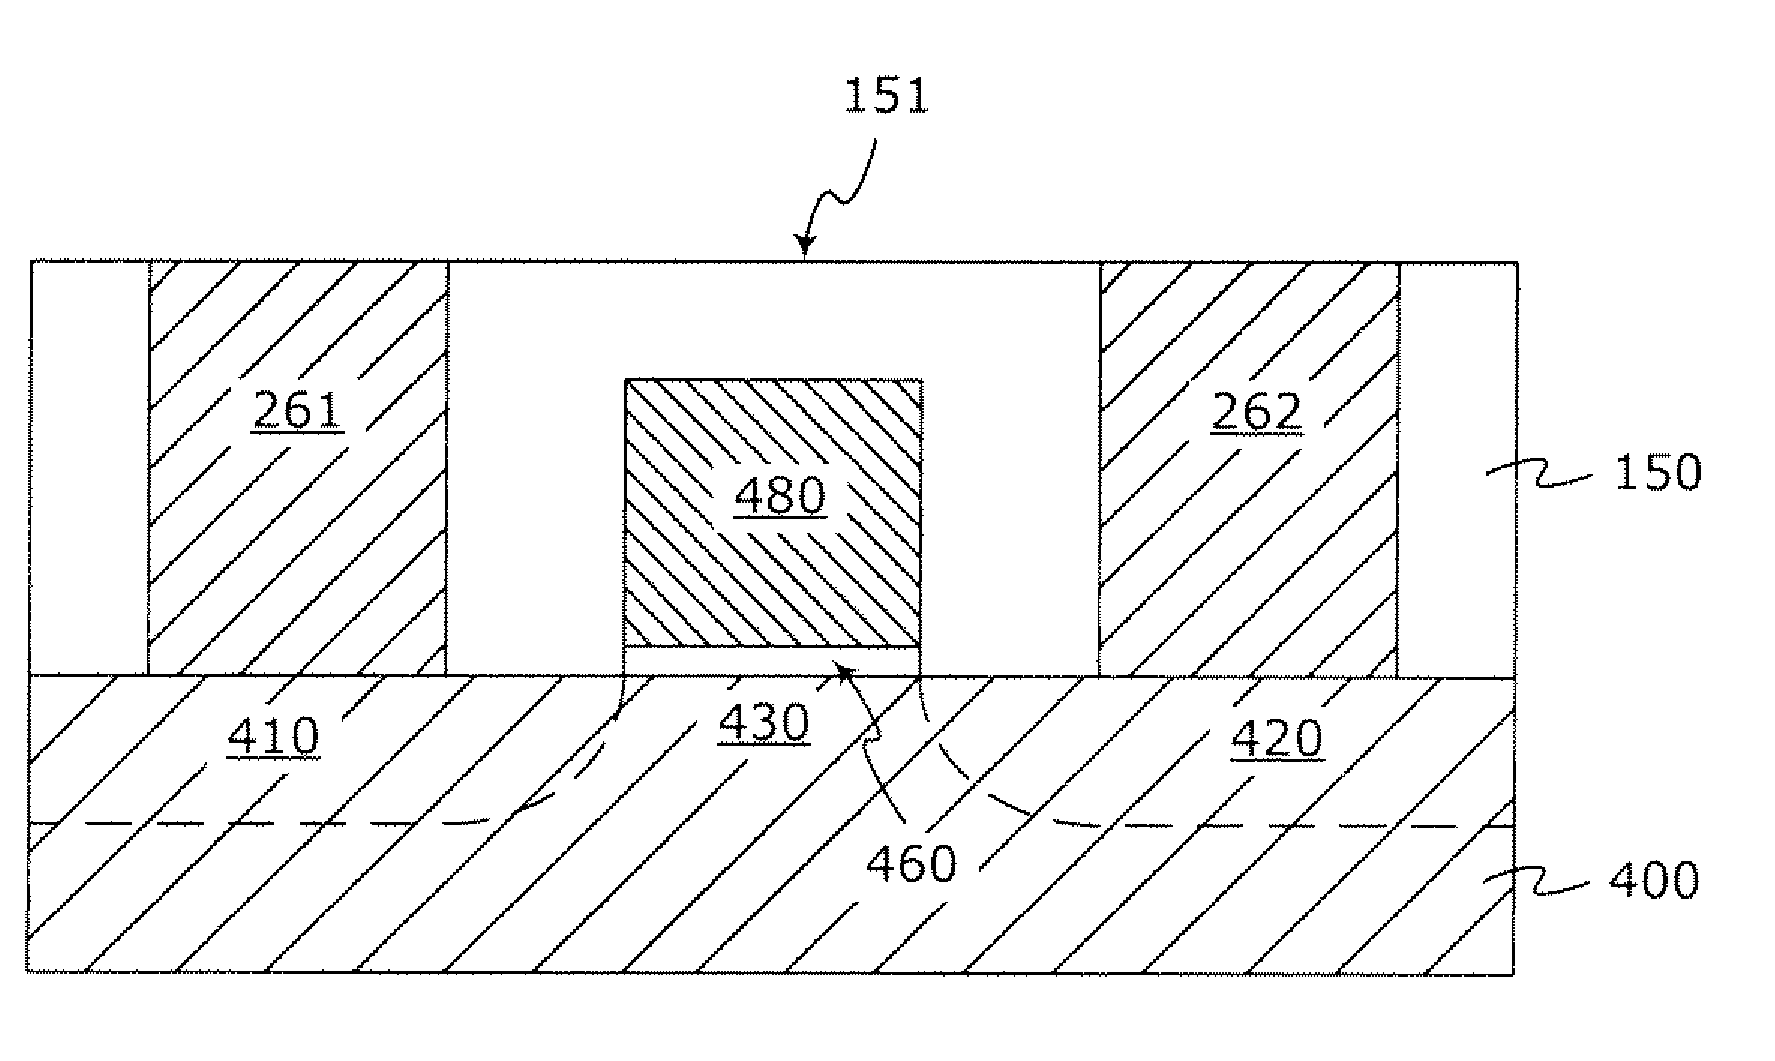 Methods of forming nickel sulfide film on a semiconductor device